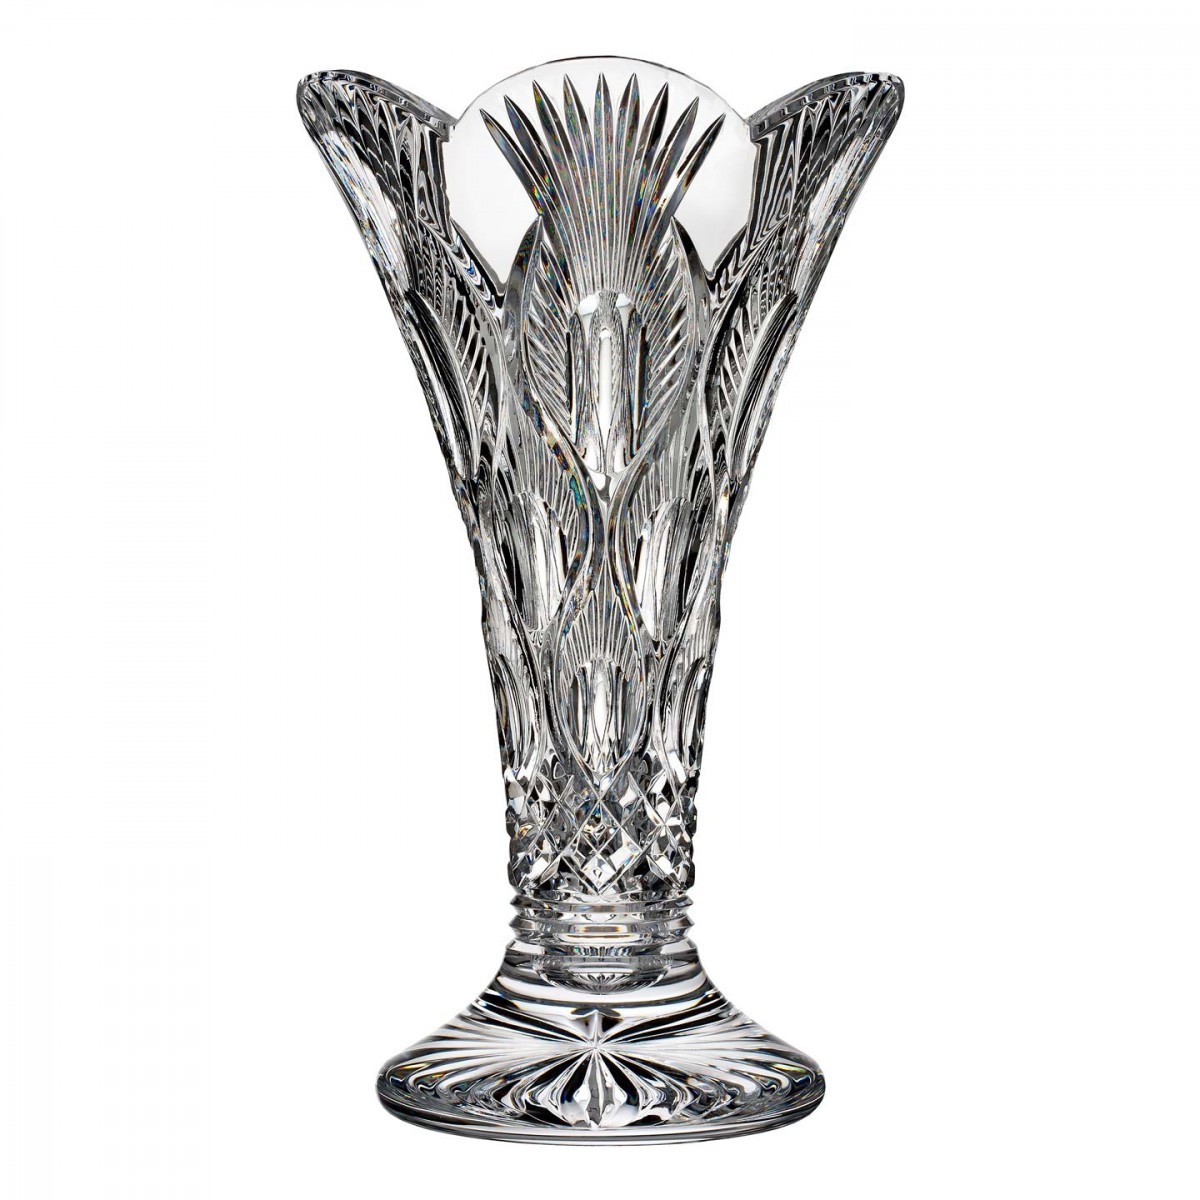 25 Fashionable Retired Waterford Crystal Vase Patterns 2022 free download retired waterford crystal vase patterns of peacock 14in vase discontinued house of waterford crystal us with peacock 14in vase discontinued